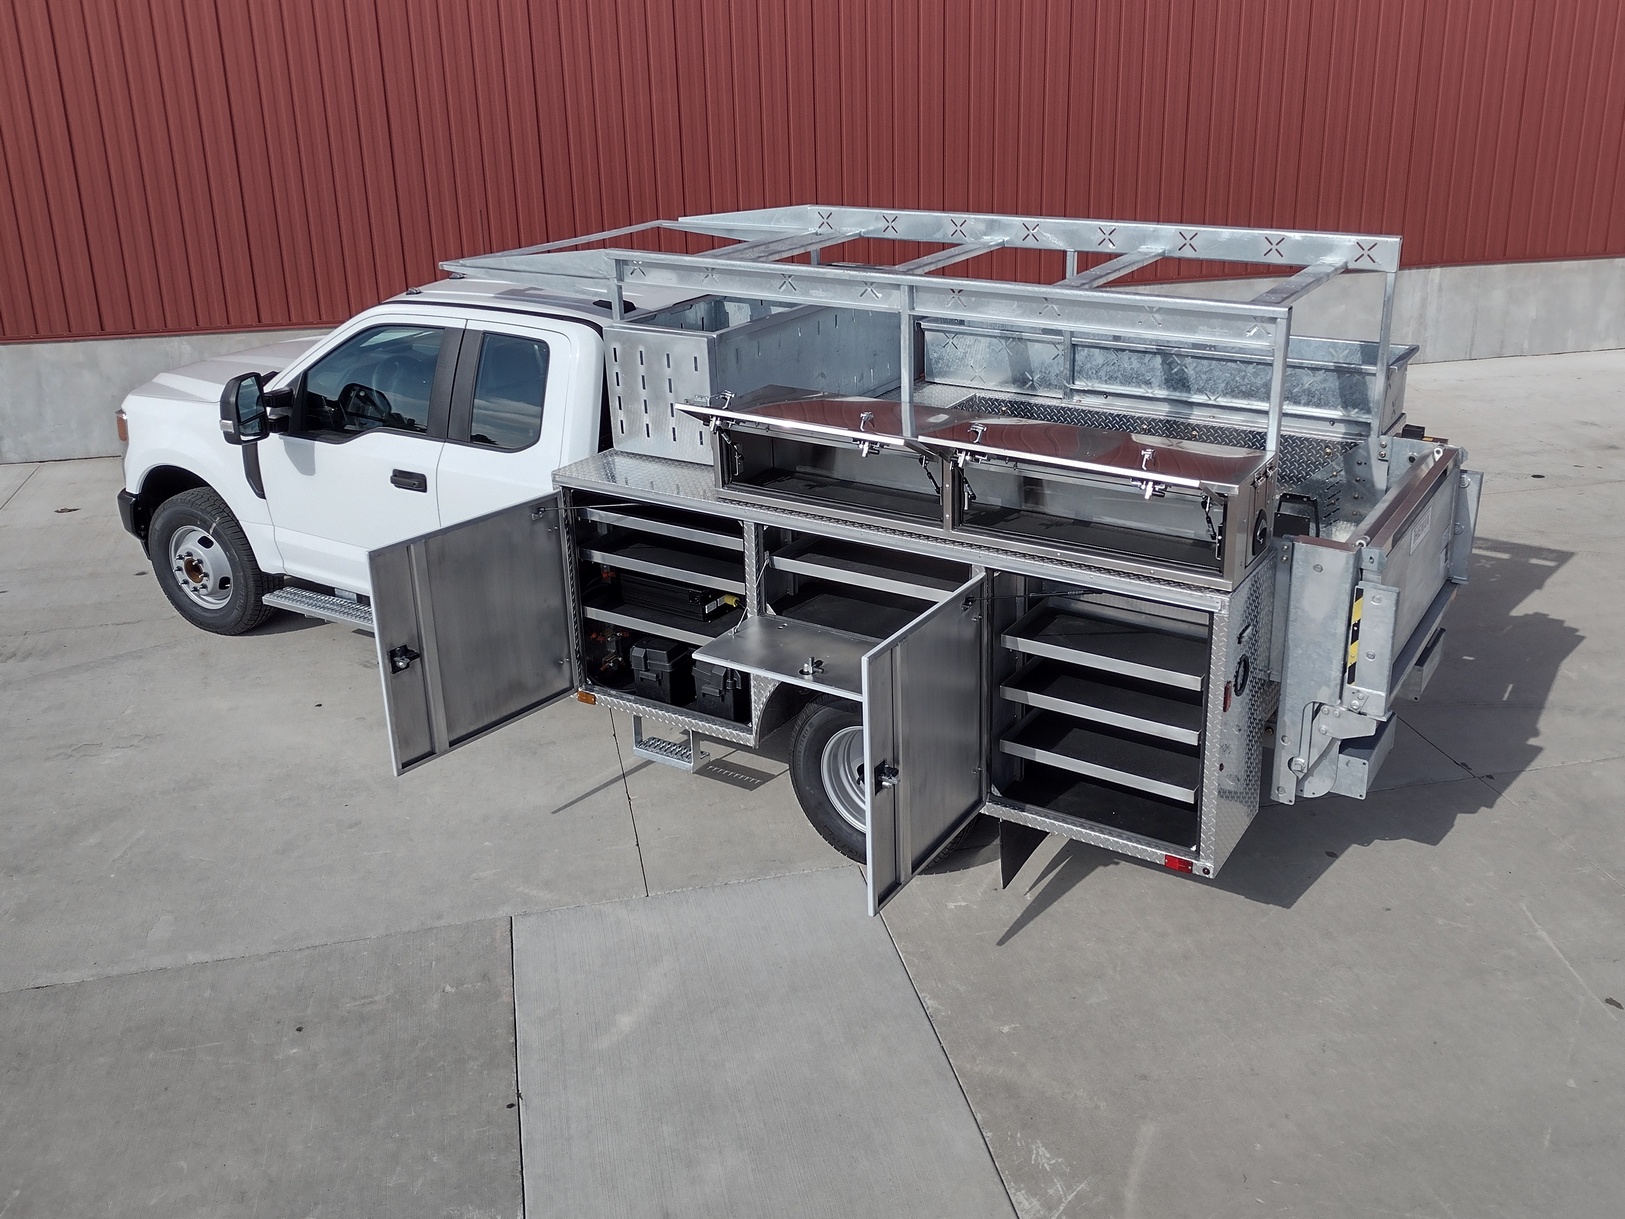 Left side view slightly from the rear of a Sauber Mfg. Co. NexGen Aluminum Service Body. Shown in natural aluminum with stainless steel rear tailgate, stop/turn/backup taillights and lighted recessed ABS plastic license plate holder. Left side compartment top ladder rack is visible. Left side compartments are open showing shelves and storage areas. The truck is shown in front of a red metal building on concrete.